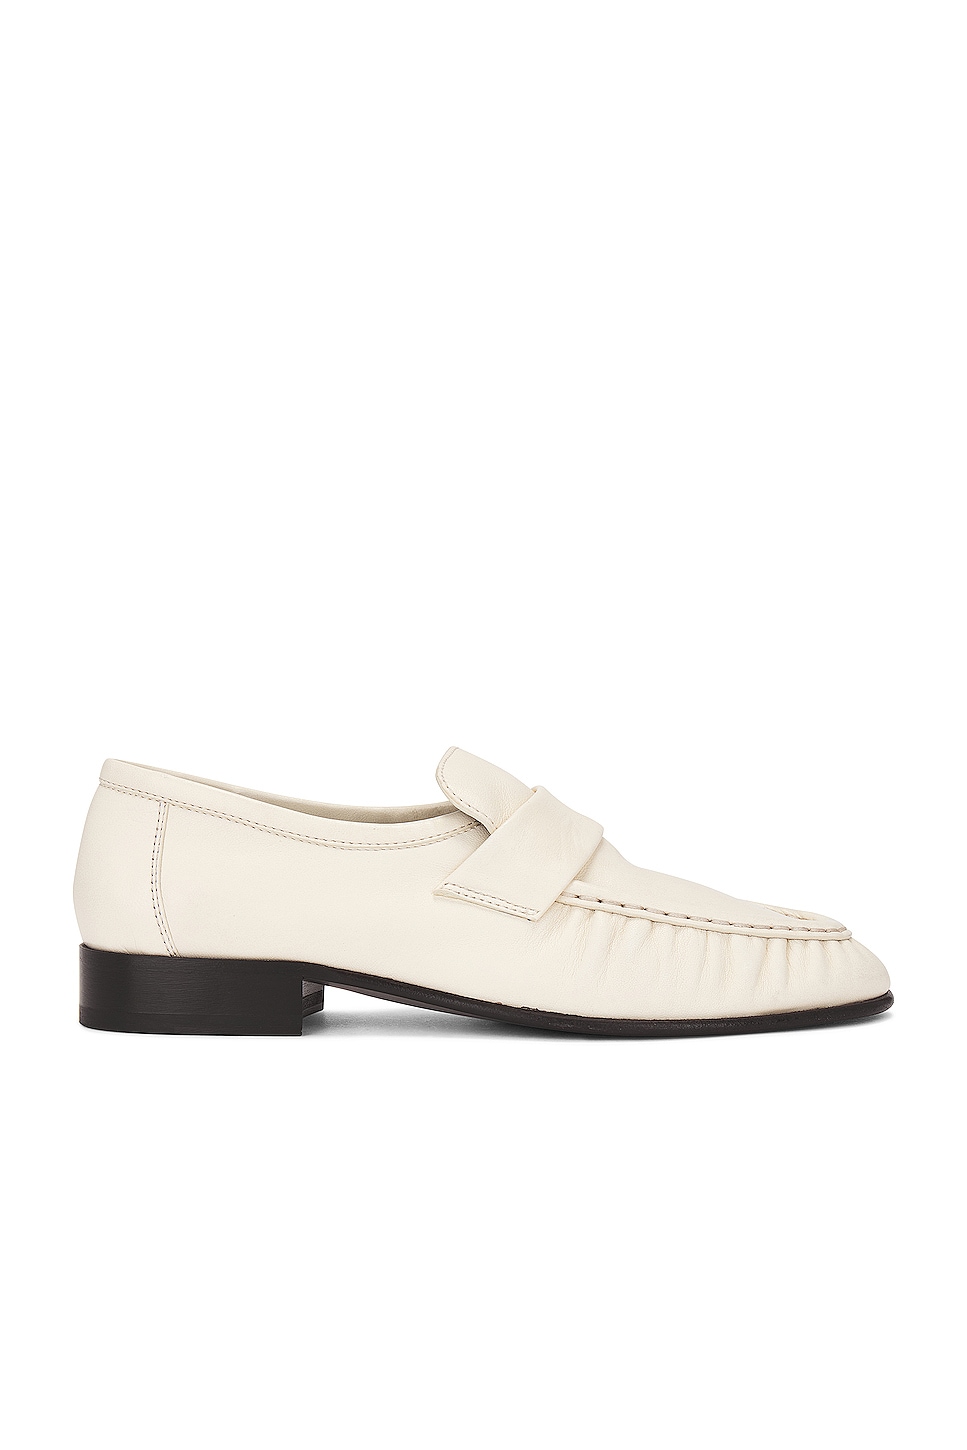 Image 1 of The Row Soft Loafer in Cream